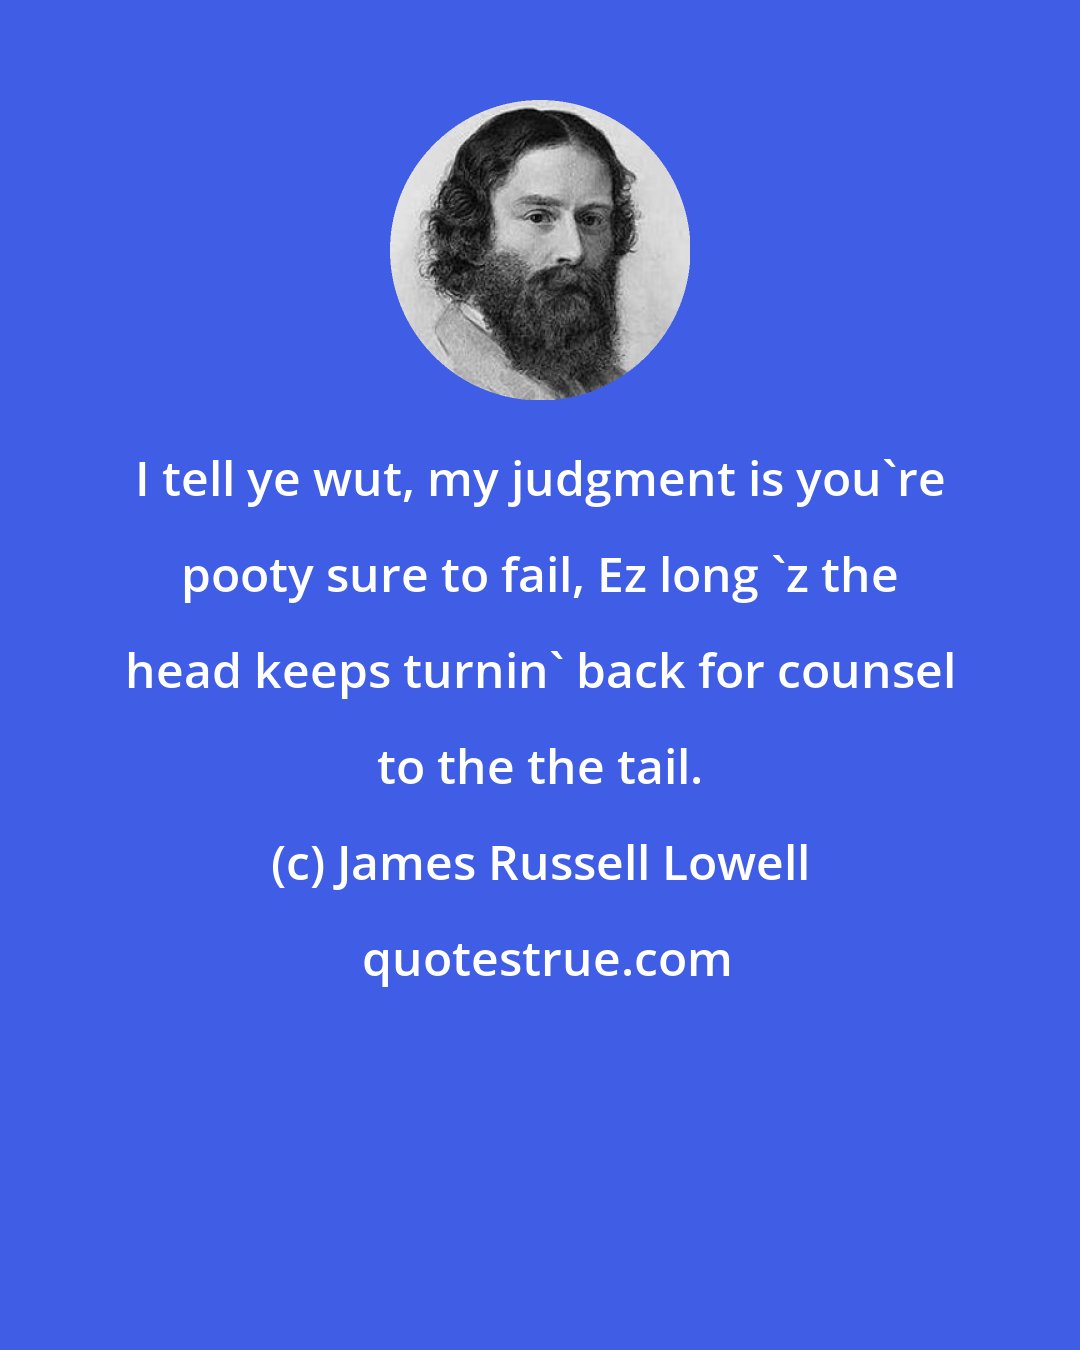 James Russell Lowell: I tell ye wut, my judgment is you're pooty sure to fail, Ez long 'z the head keeps turnin' back for counsel to the the tail.